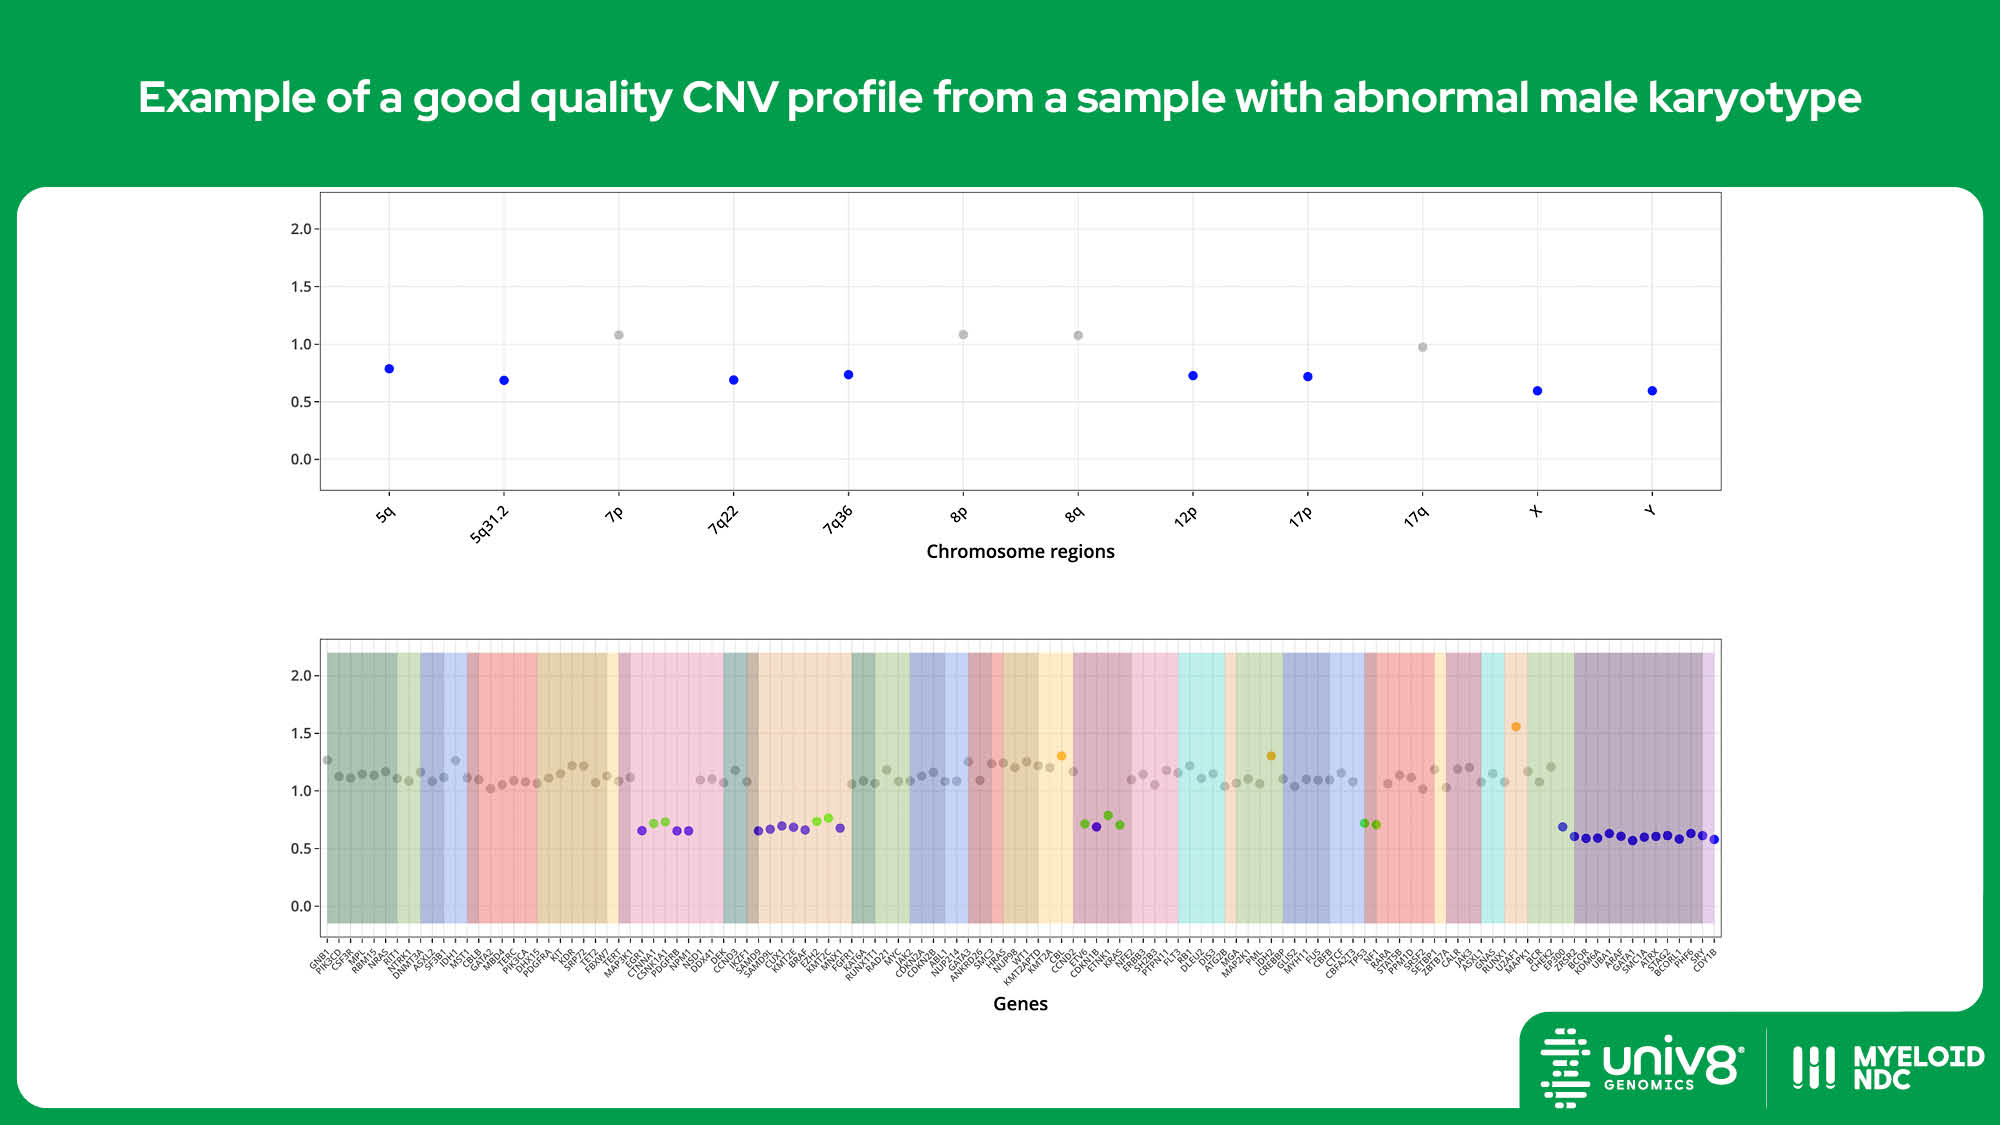 Example of a good quality CNV profile from a sample with abnormal male karyotype